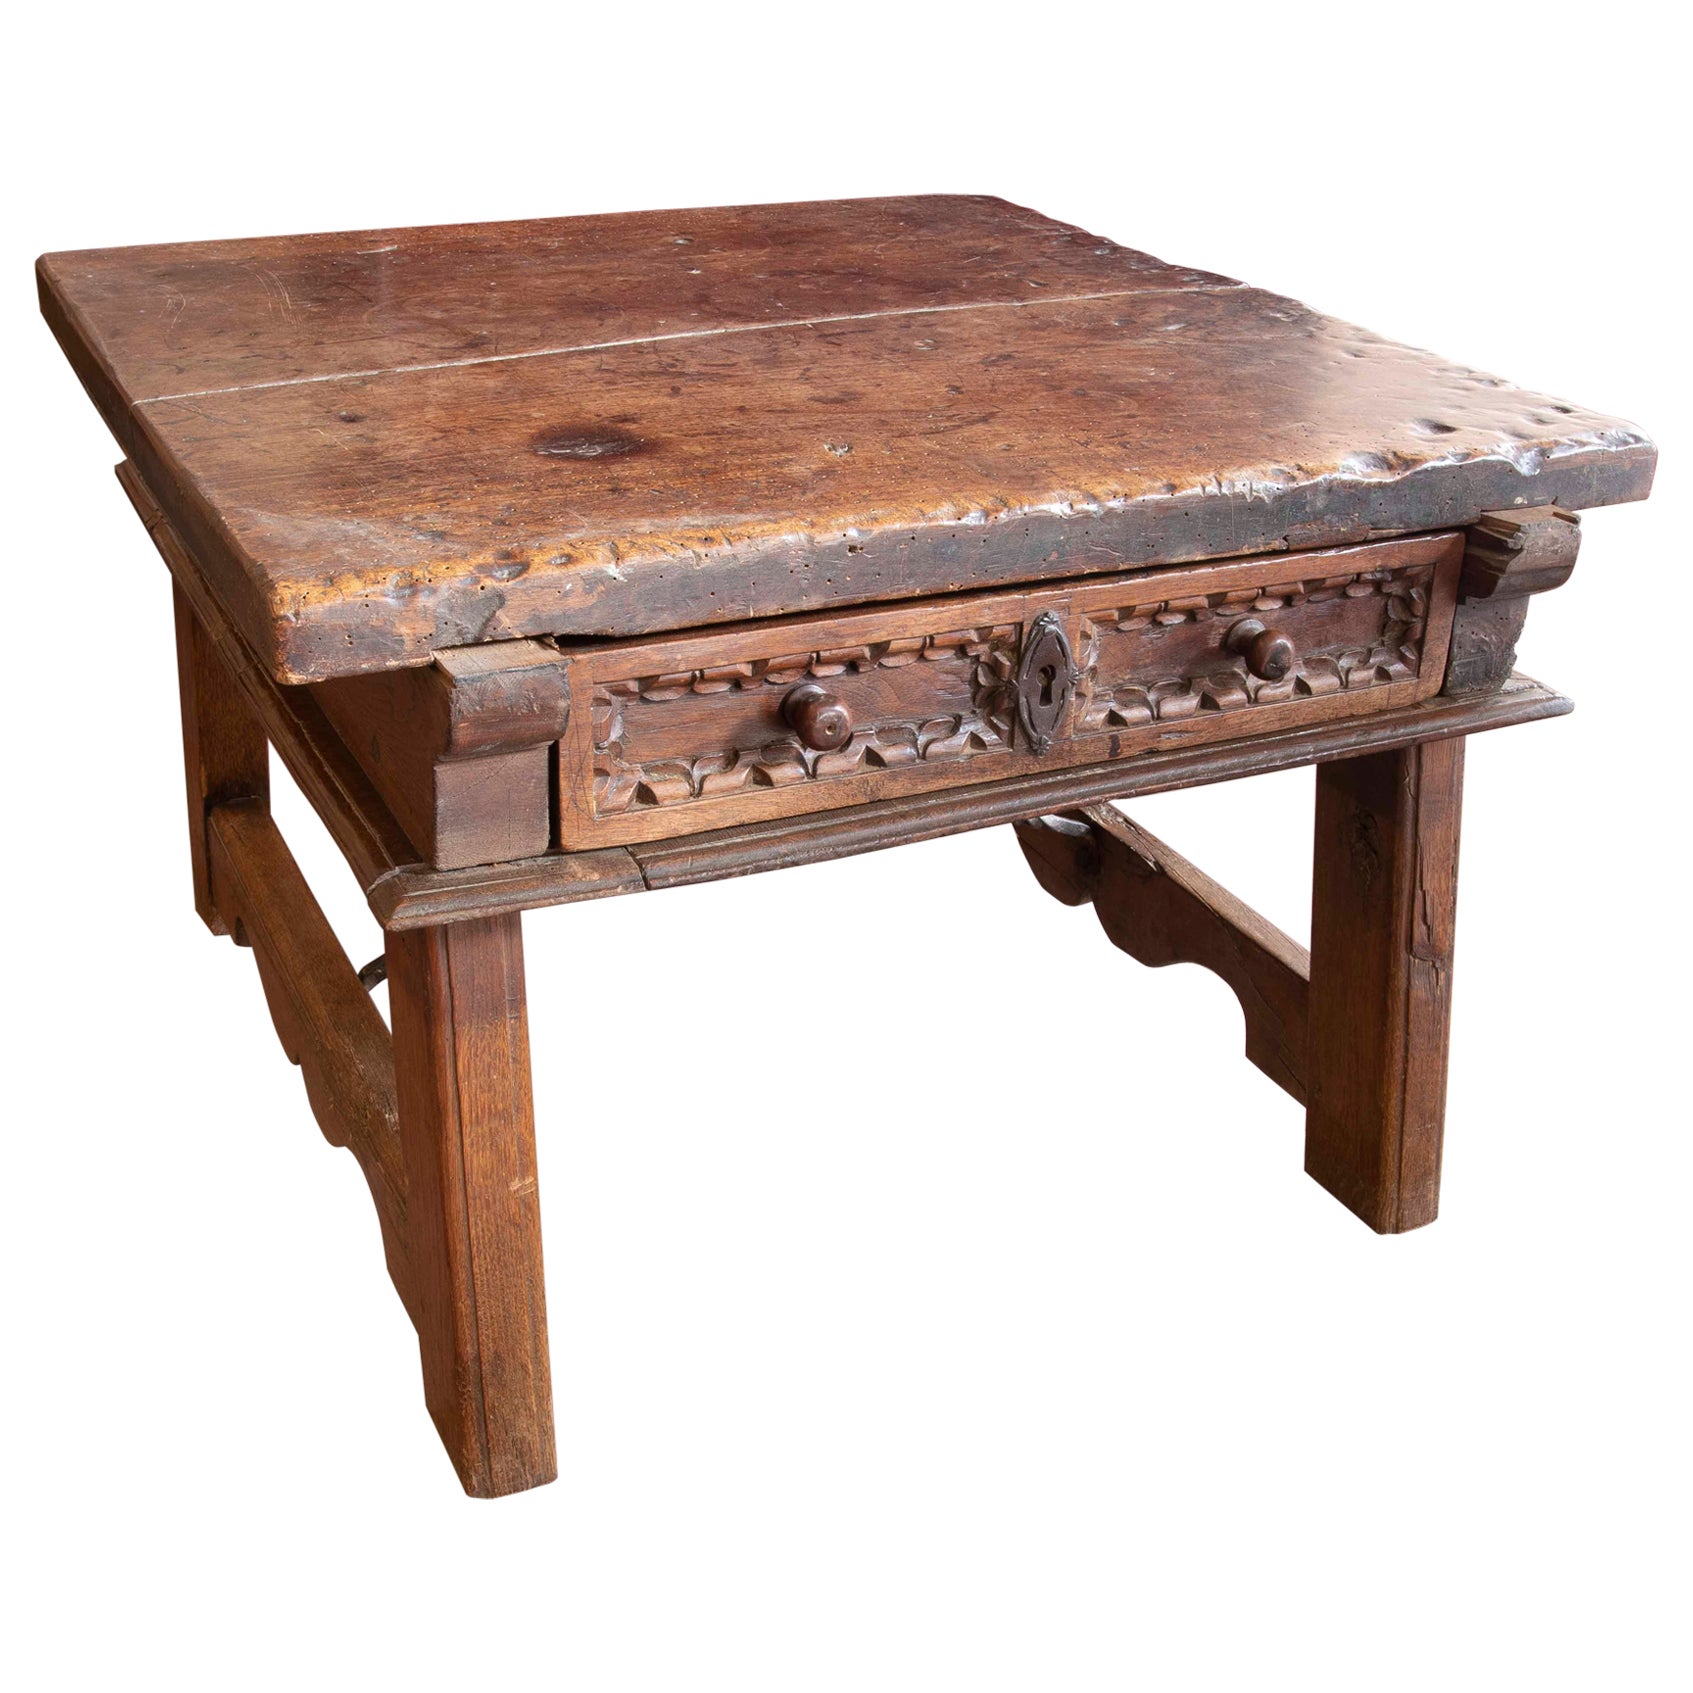 18th Century Spanish Walnut Coffee Table with Carved Drawer